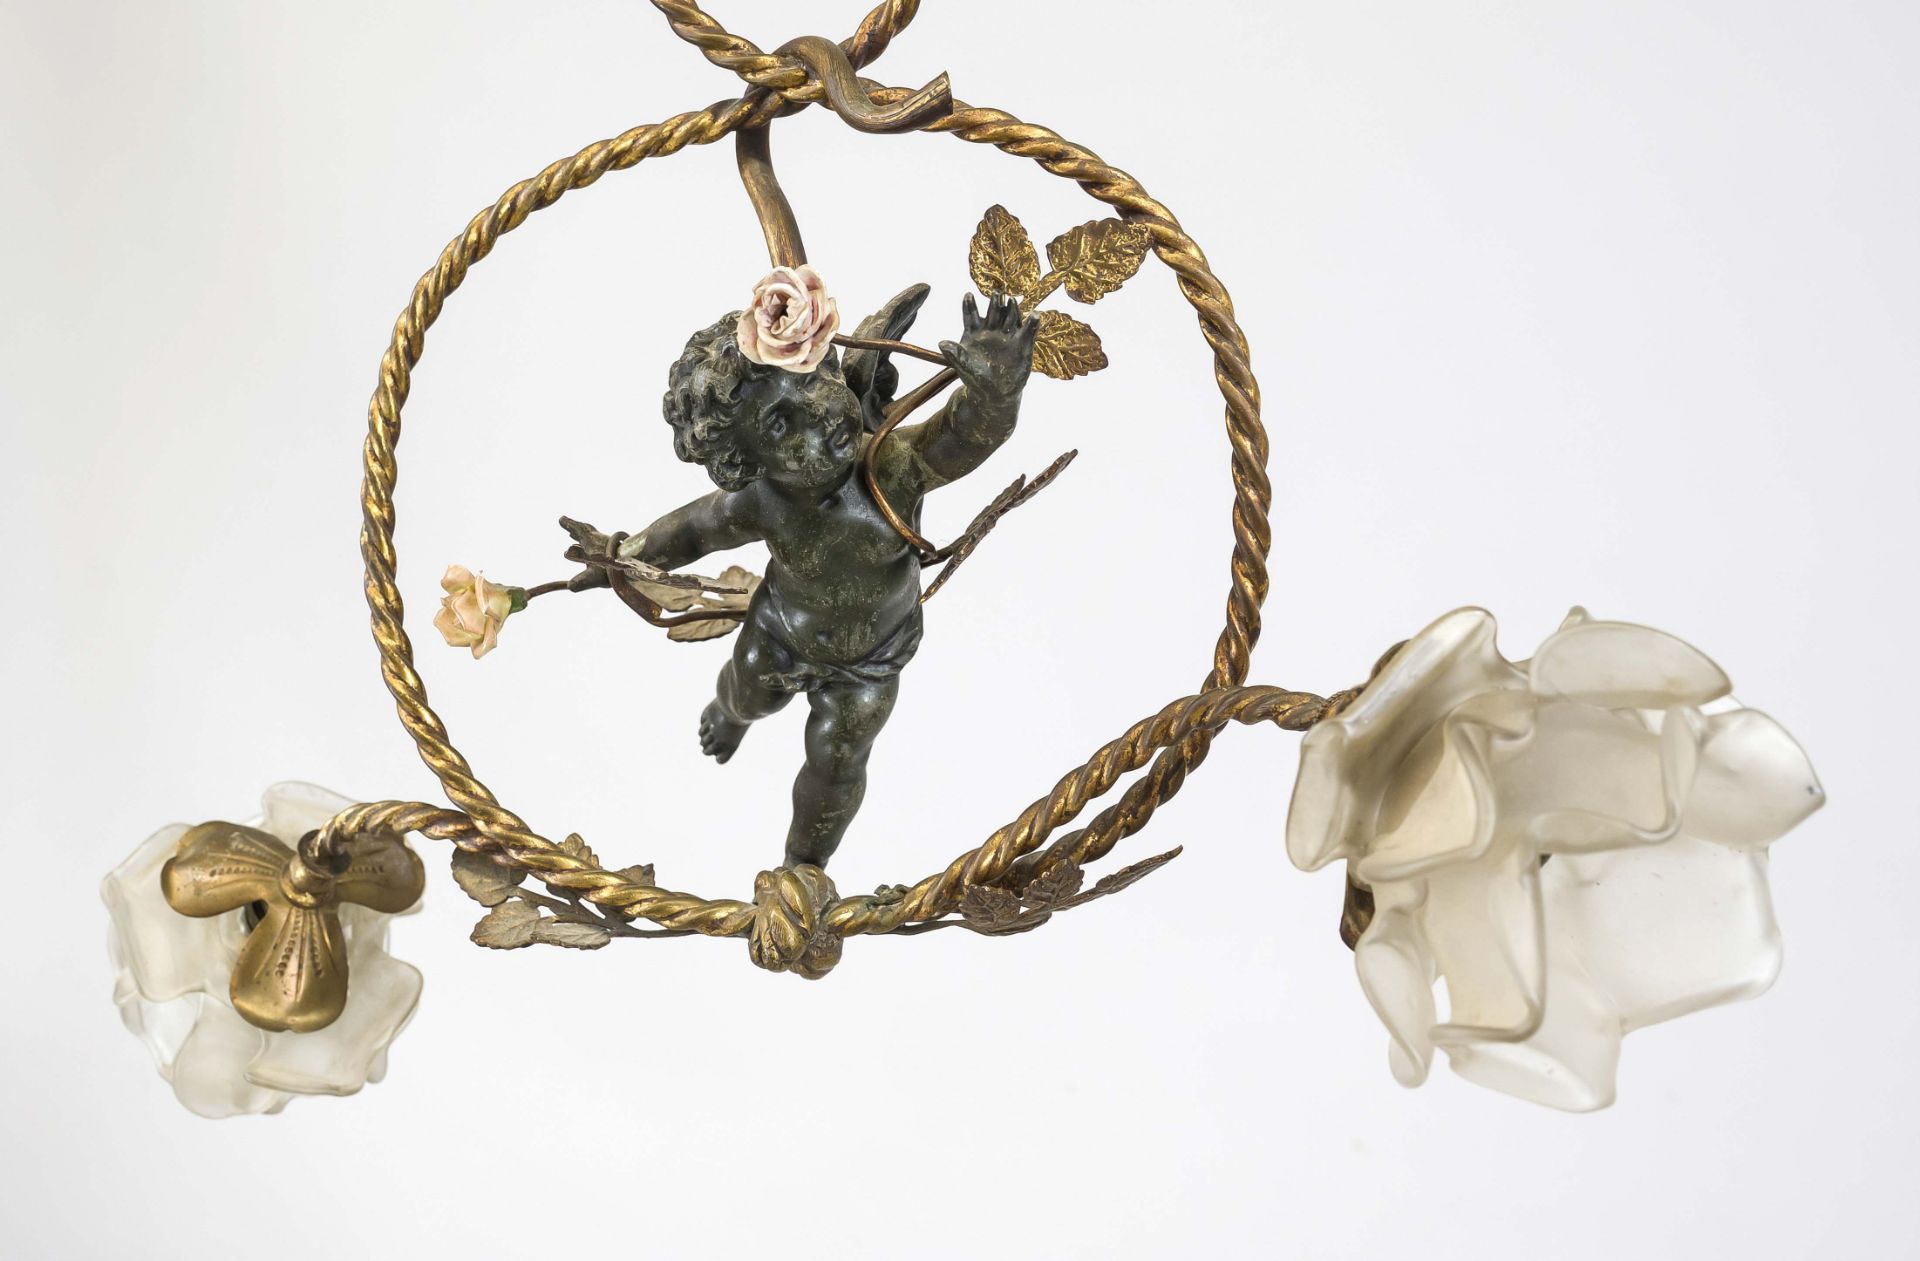 Ceiling lamp, late 19th century, floating putto surrounded by shrubs and leaves, 2 shades in the - Image 2 of 2